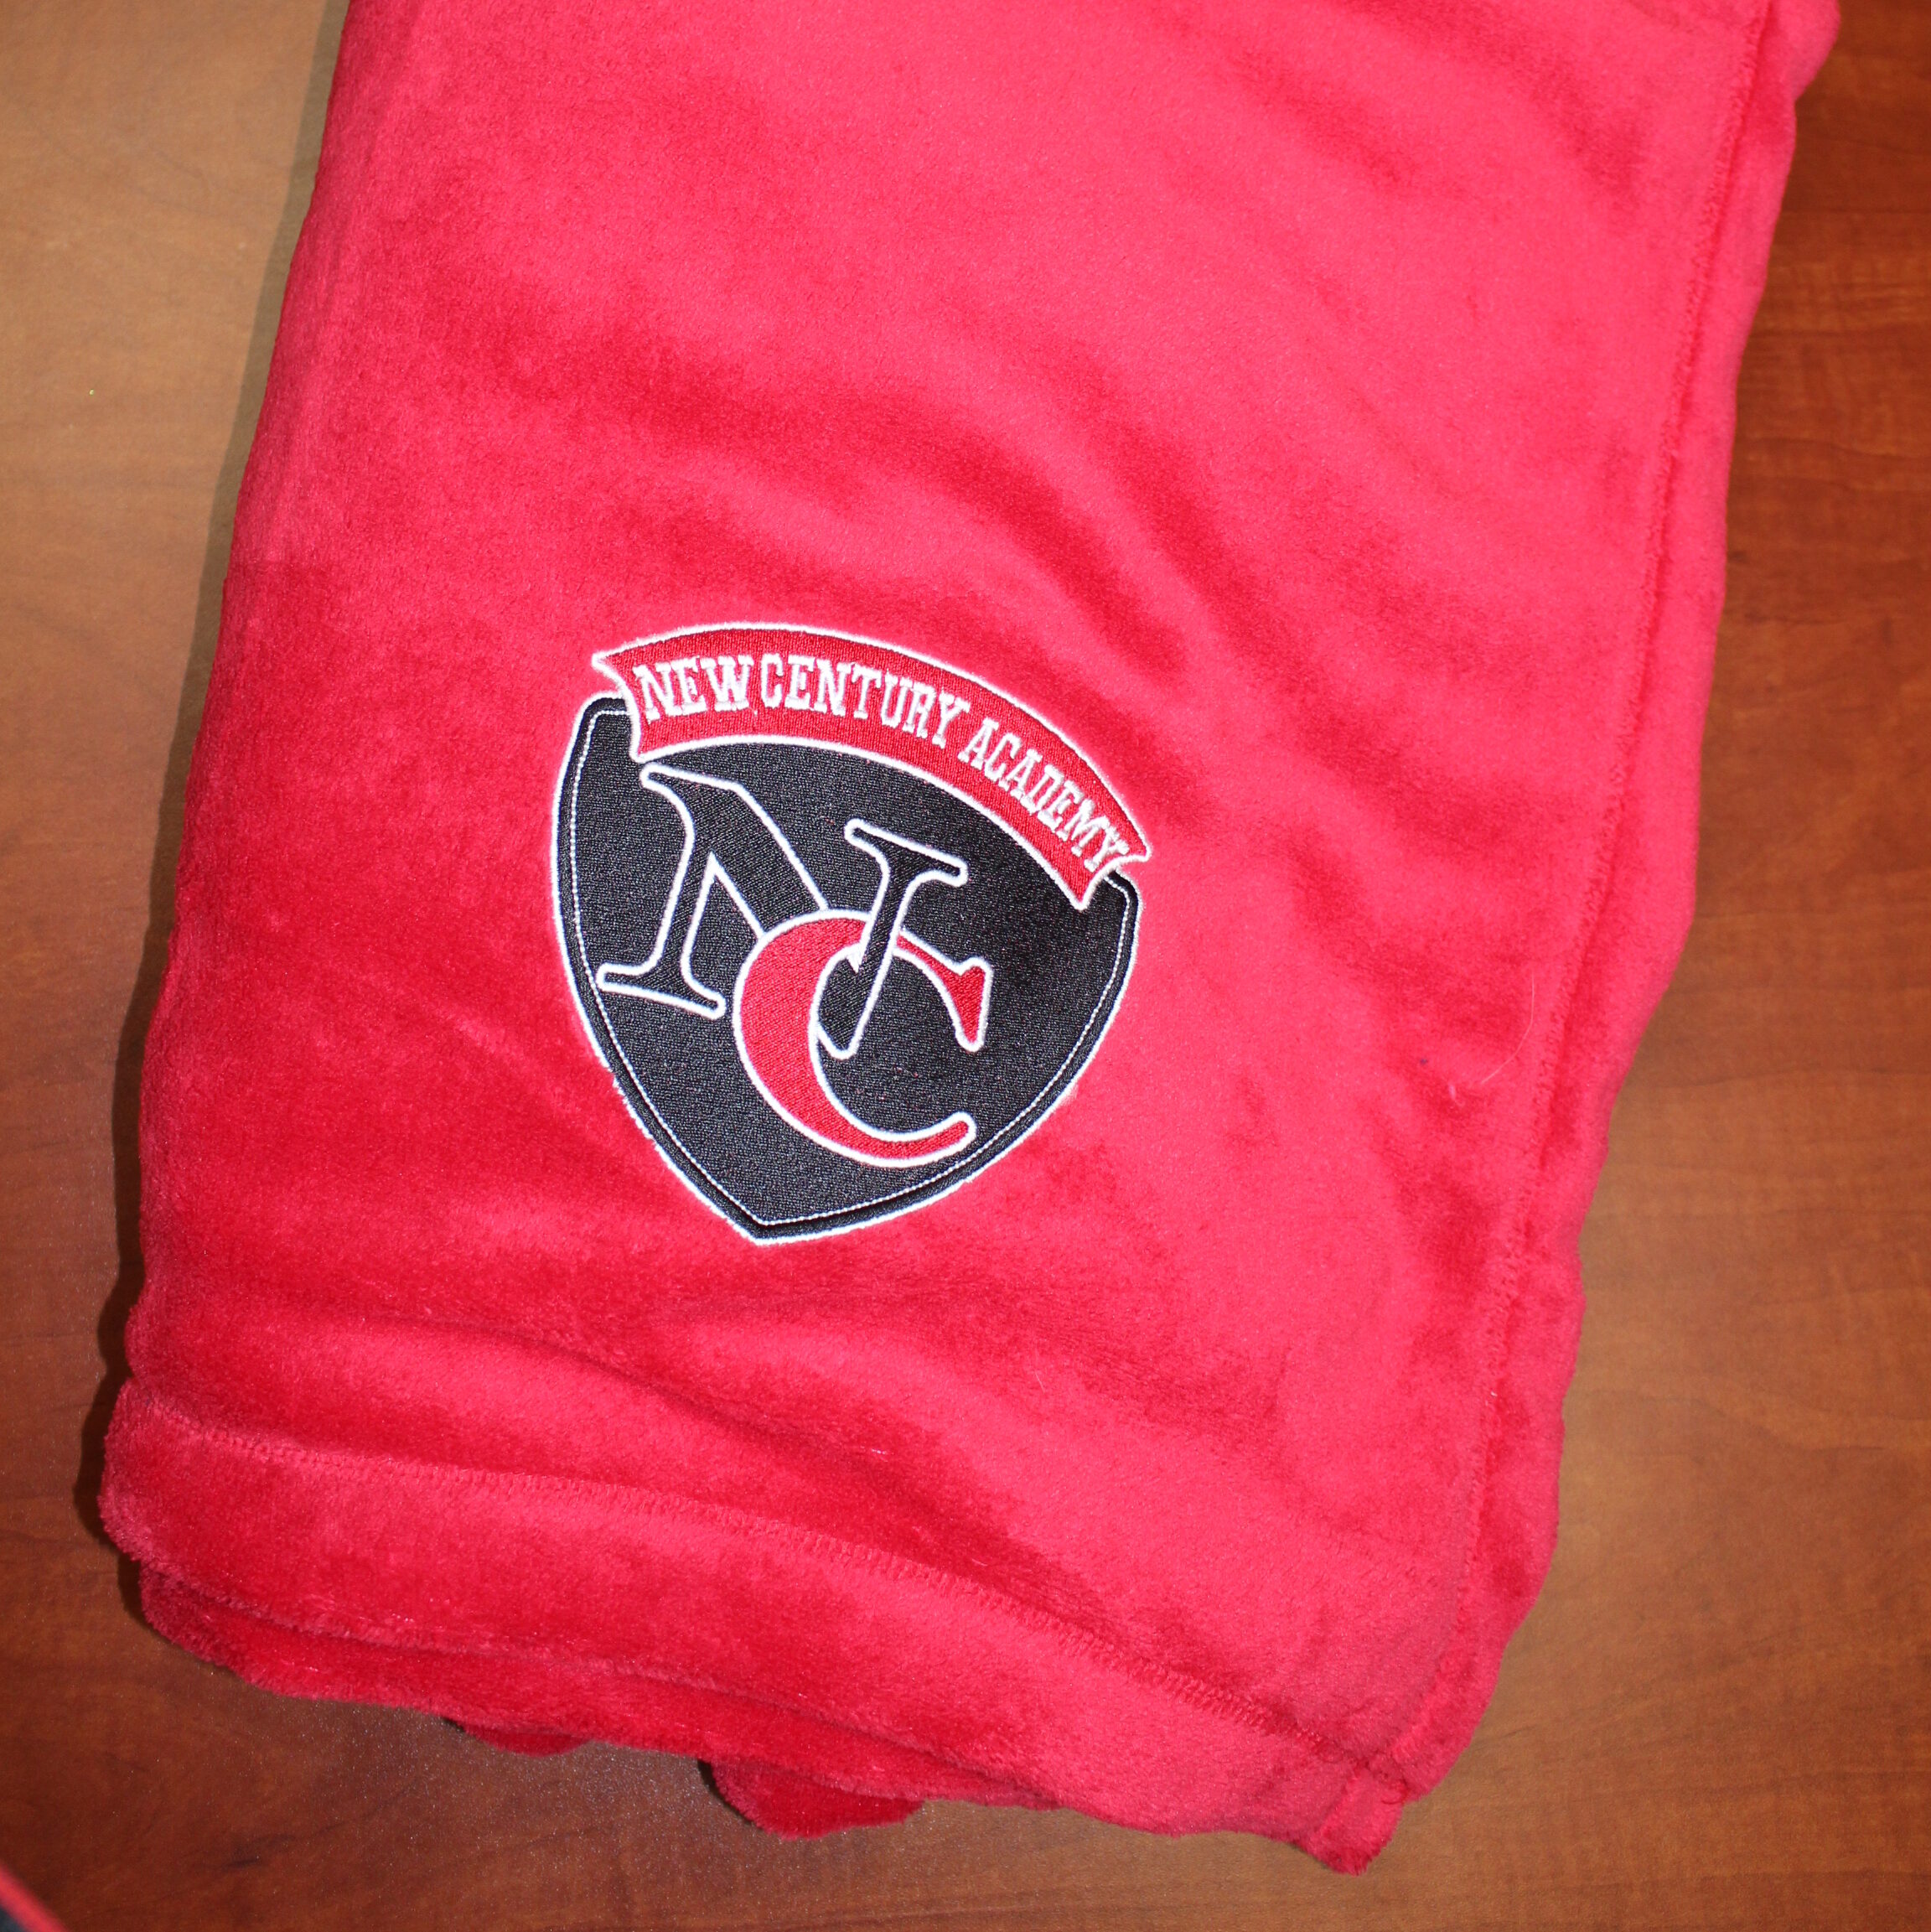 Red fleece blanket with the New Century Academy logo on it